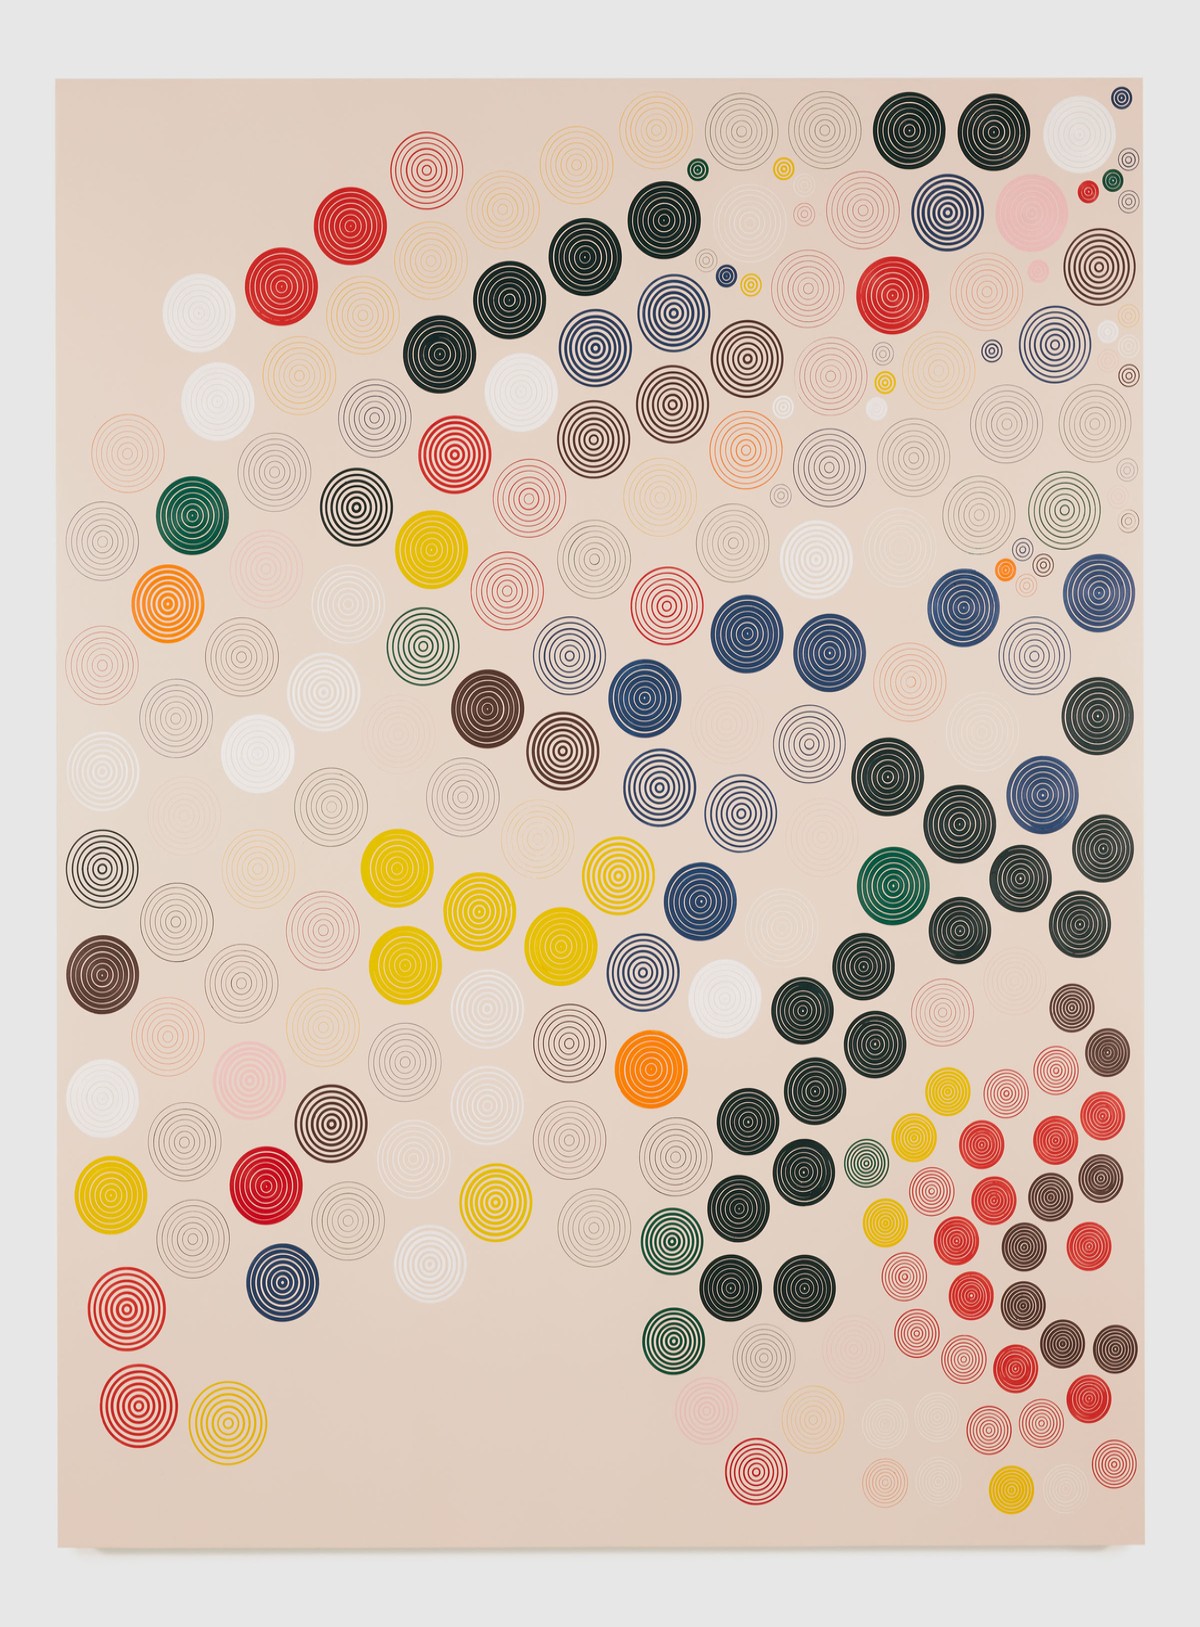 A vertical composition with an arrangement of colored dots on a pale pink background